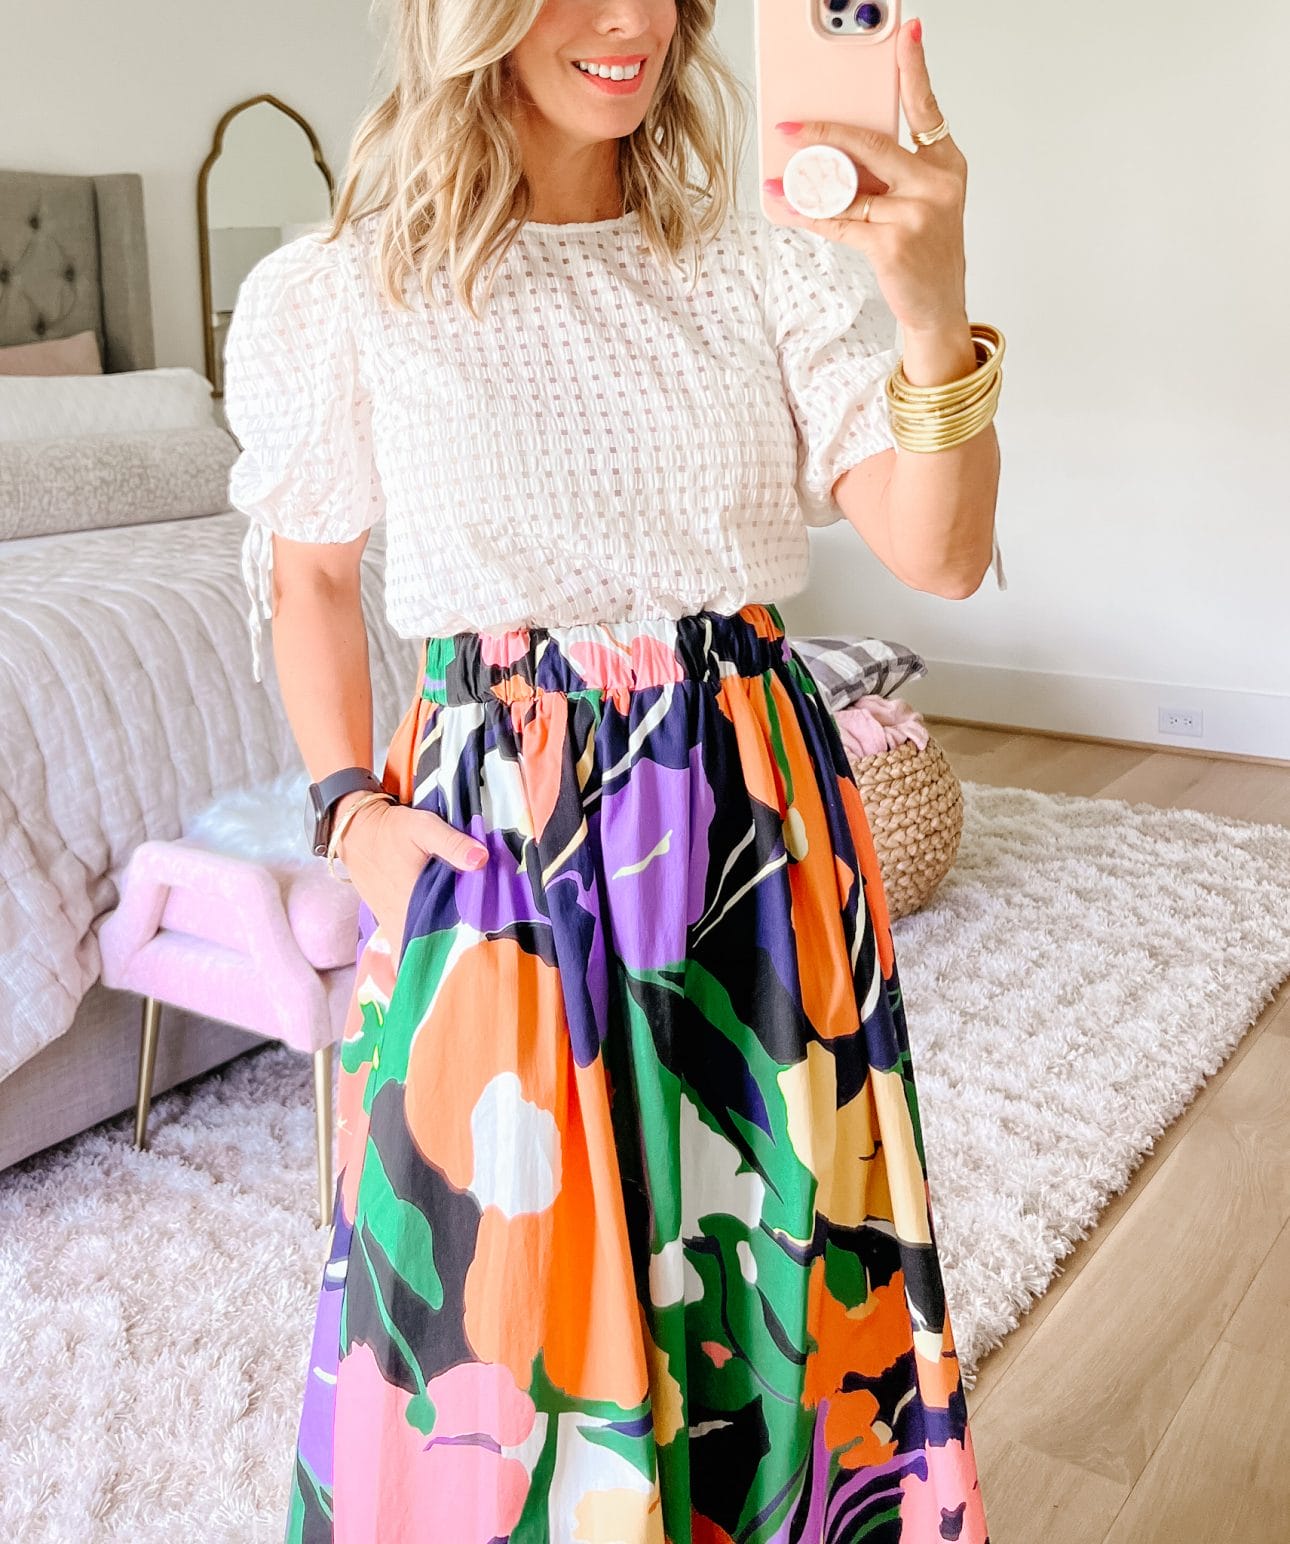 White Puff Sleeve Top, Floral Maxi Skirt, Clear Heels. 